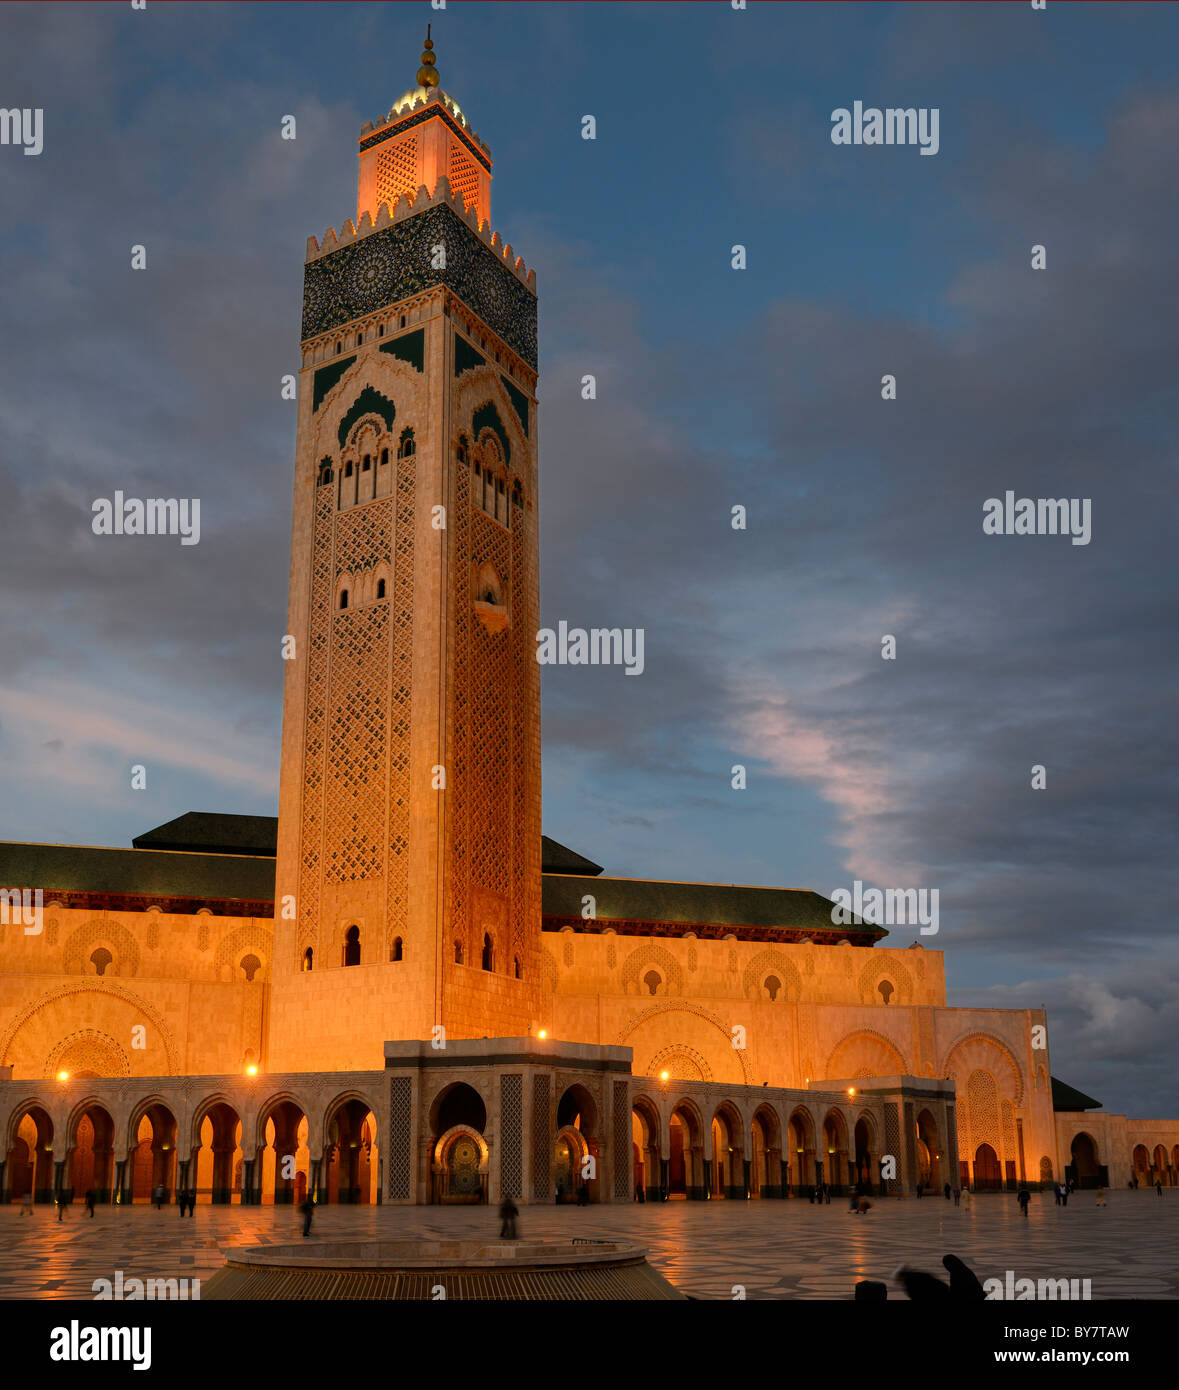 Lights on Hassan II Mosque and minaret in Casablanca Morocco at dusk Stock Photo